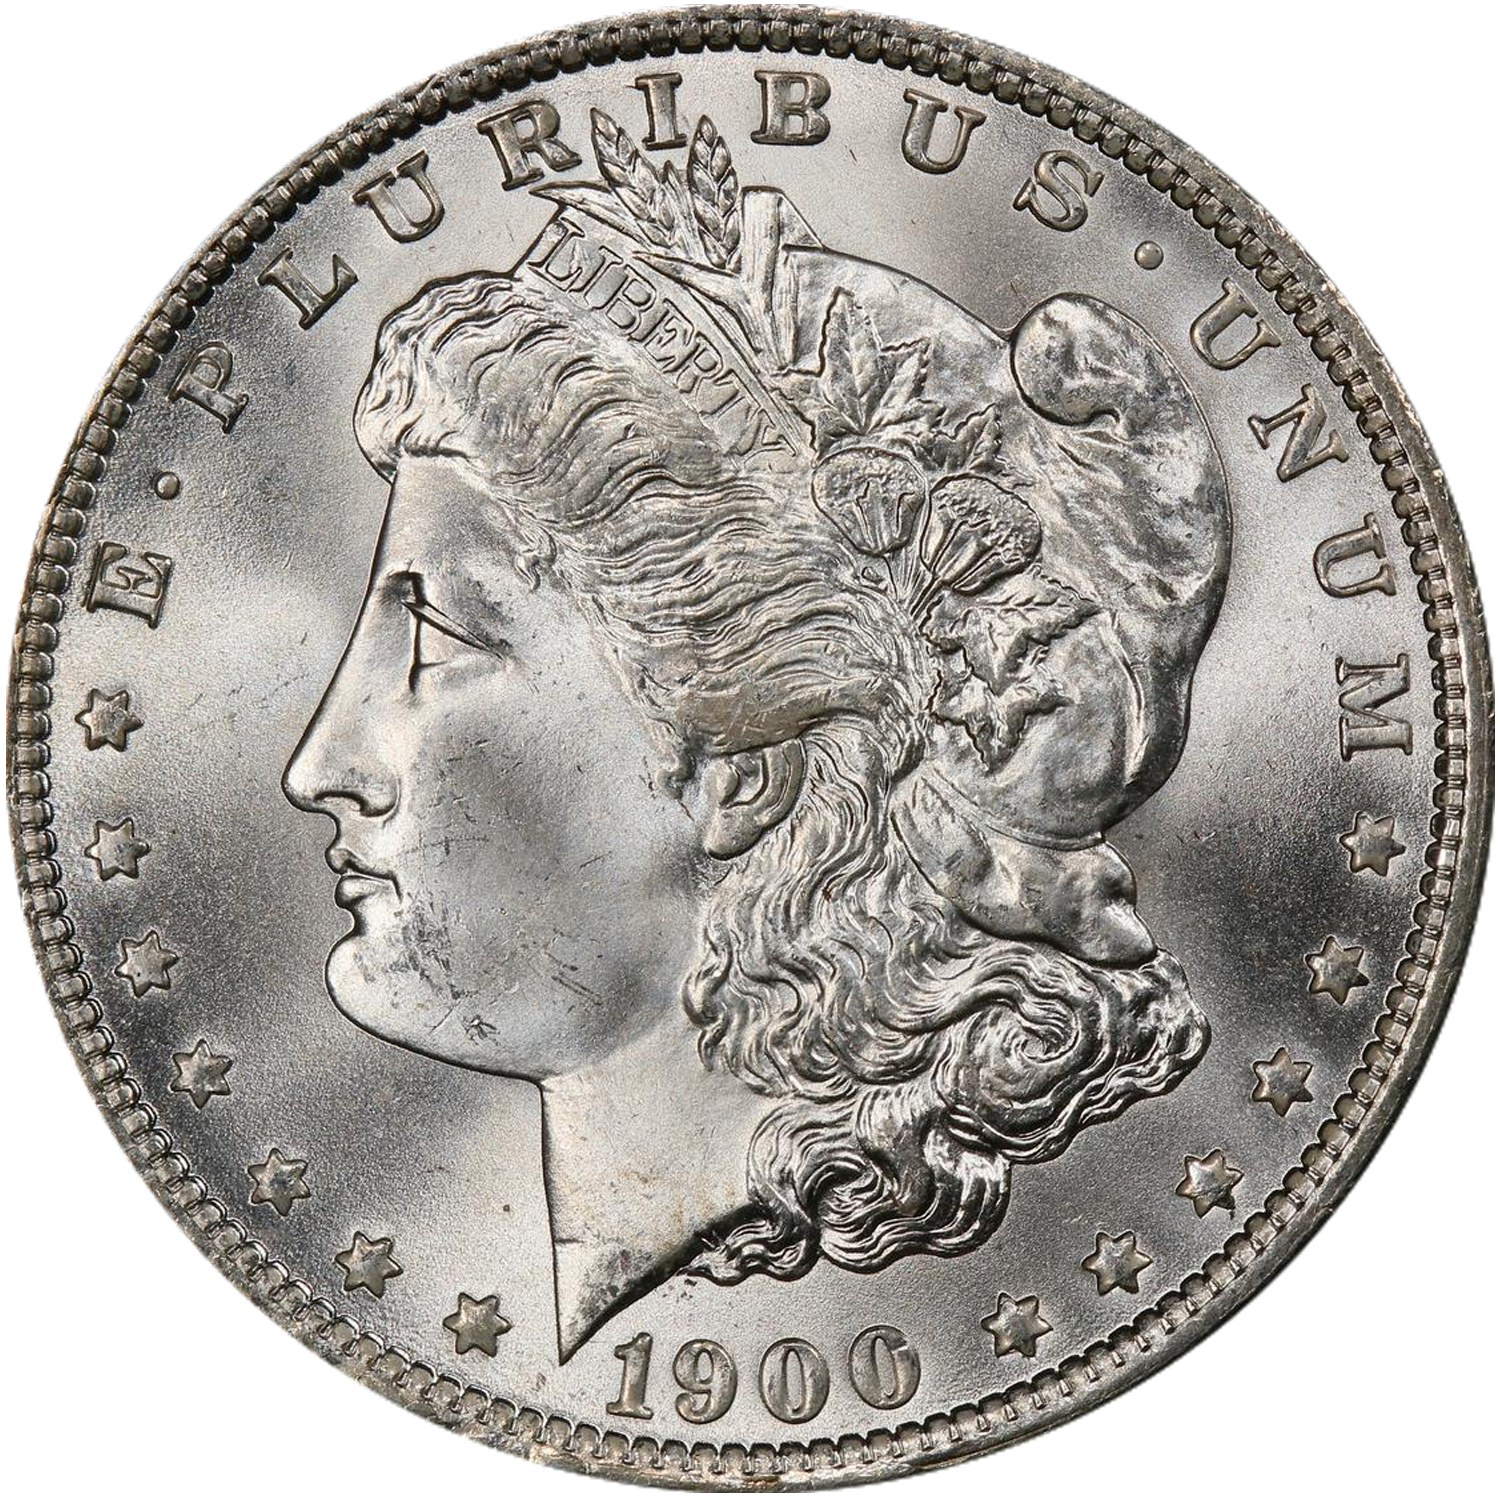 1900 new orleans coin morgan dollar value guide